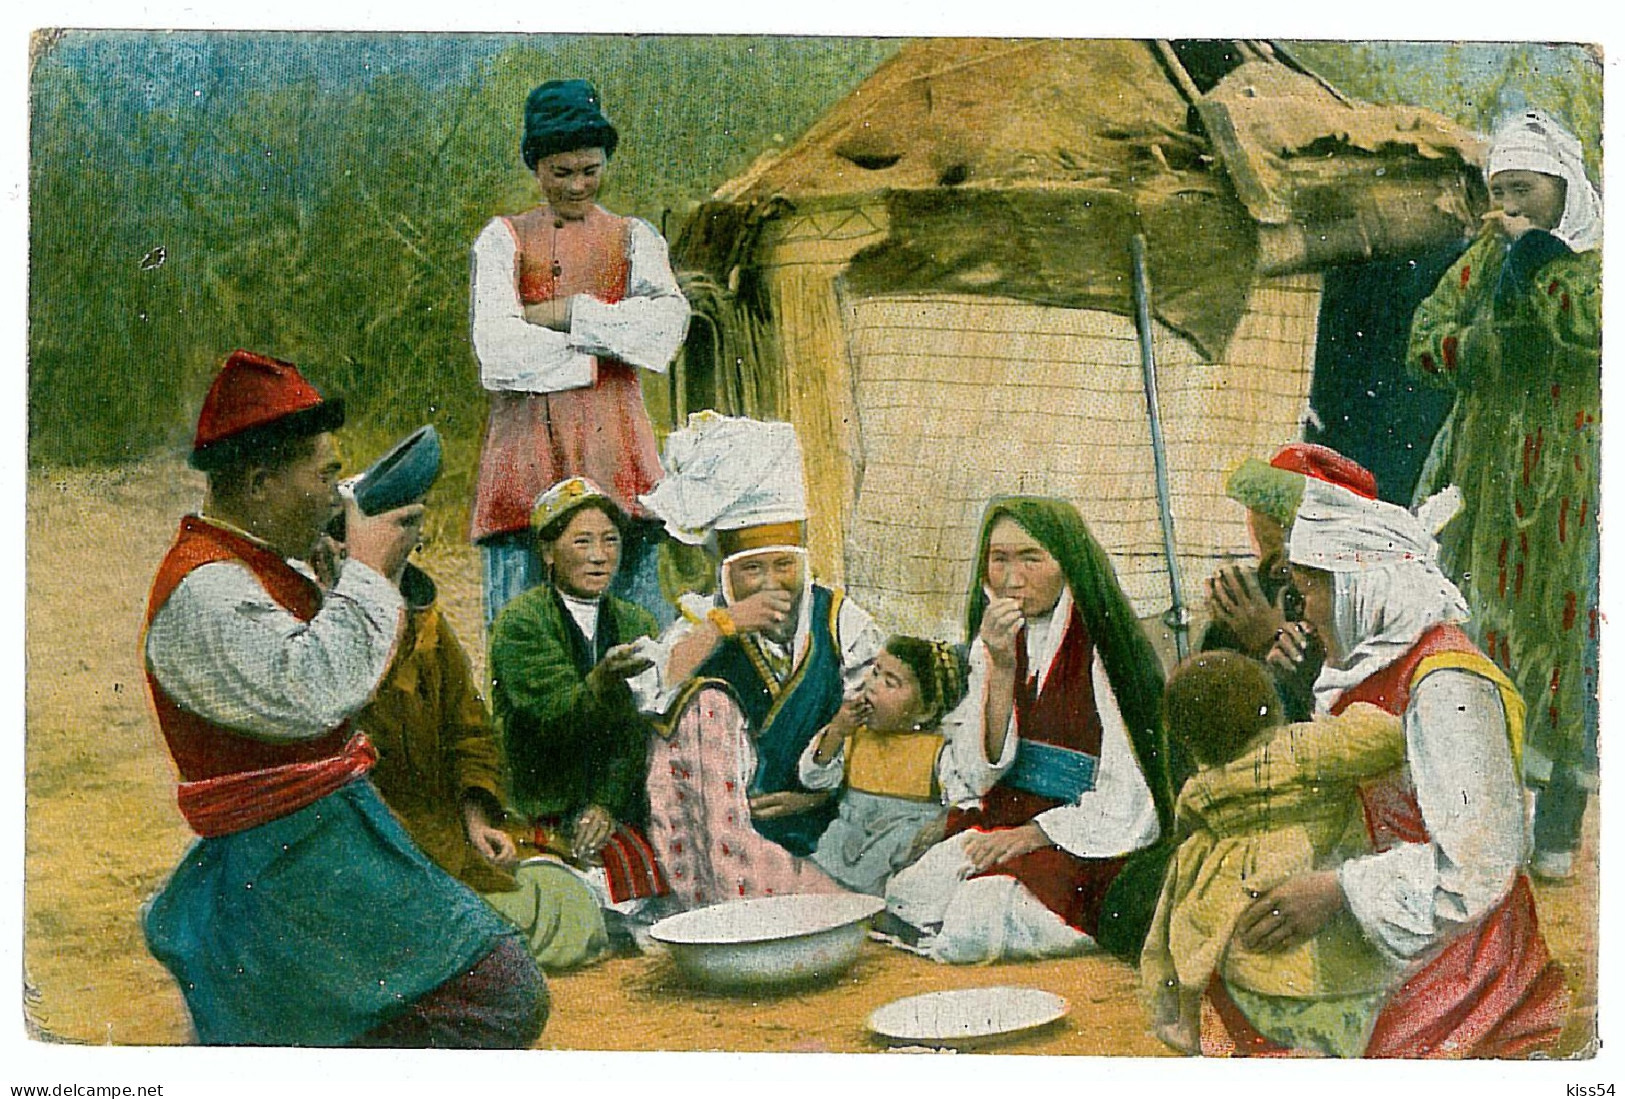 KYR 4 - 7846 ETHNICS, From Central Asian, Kyrgyzstan - Old Postcard - Used - 1917 - Kirgisistan